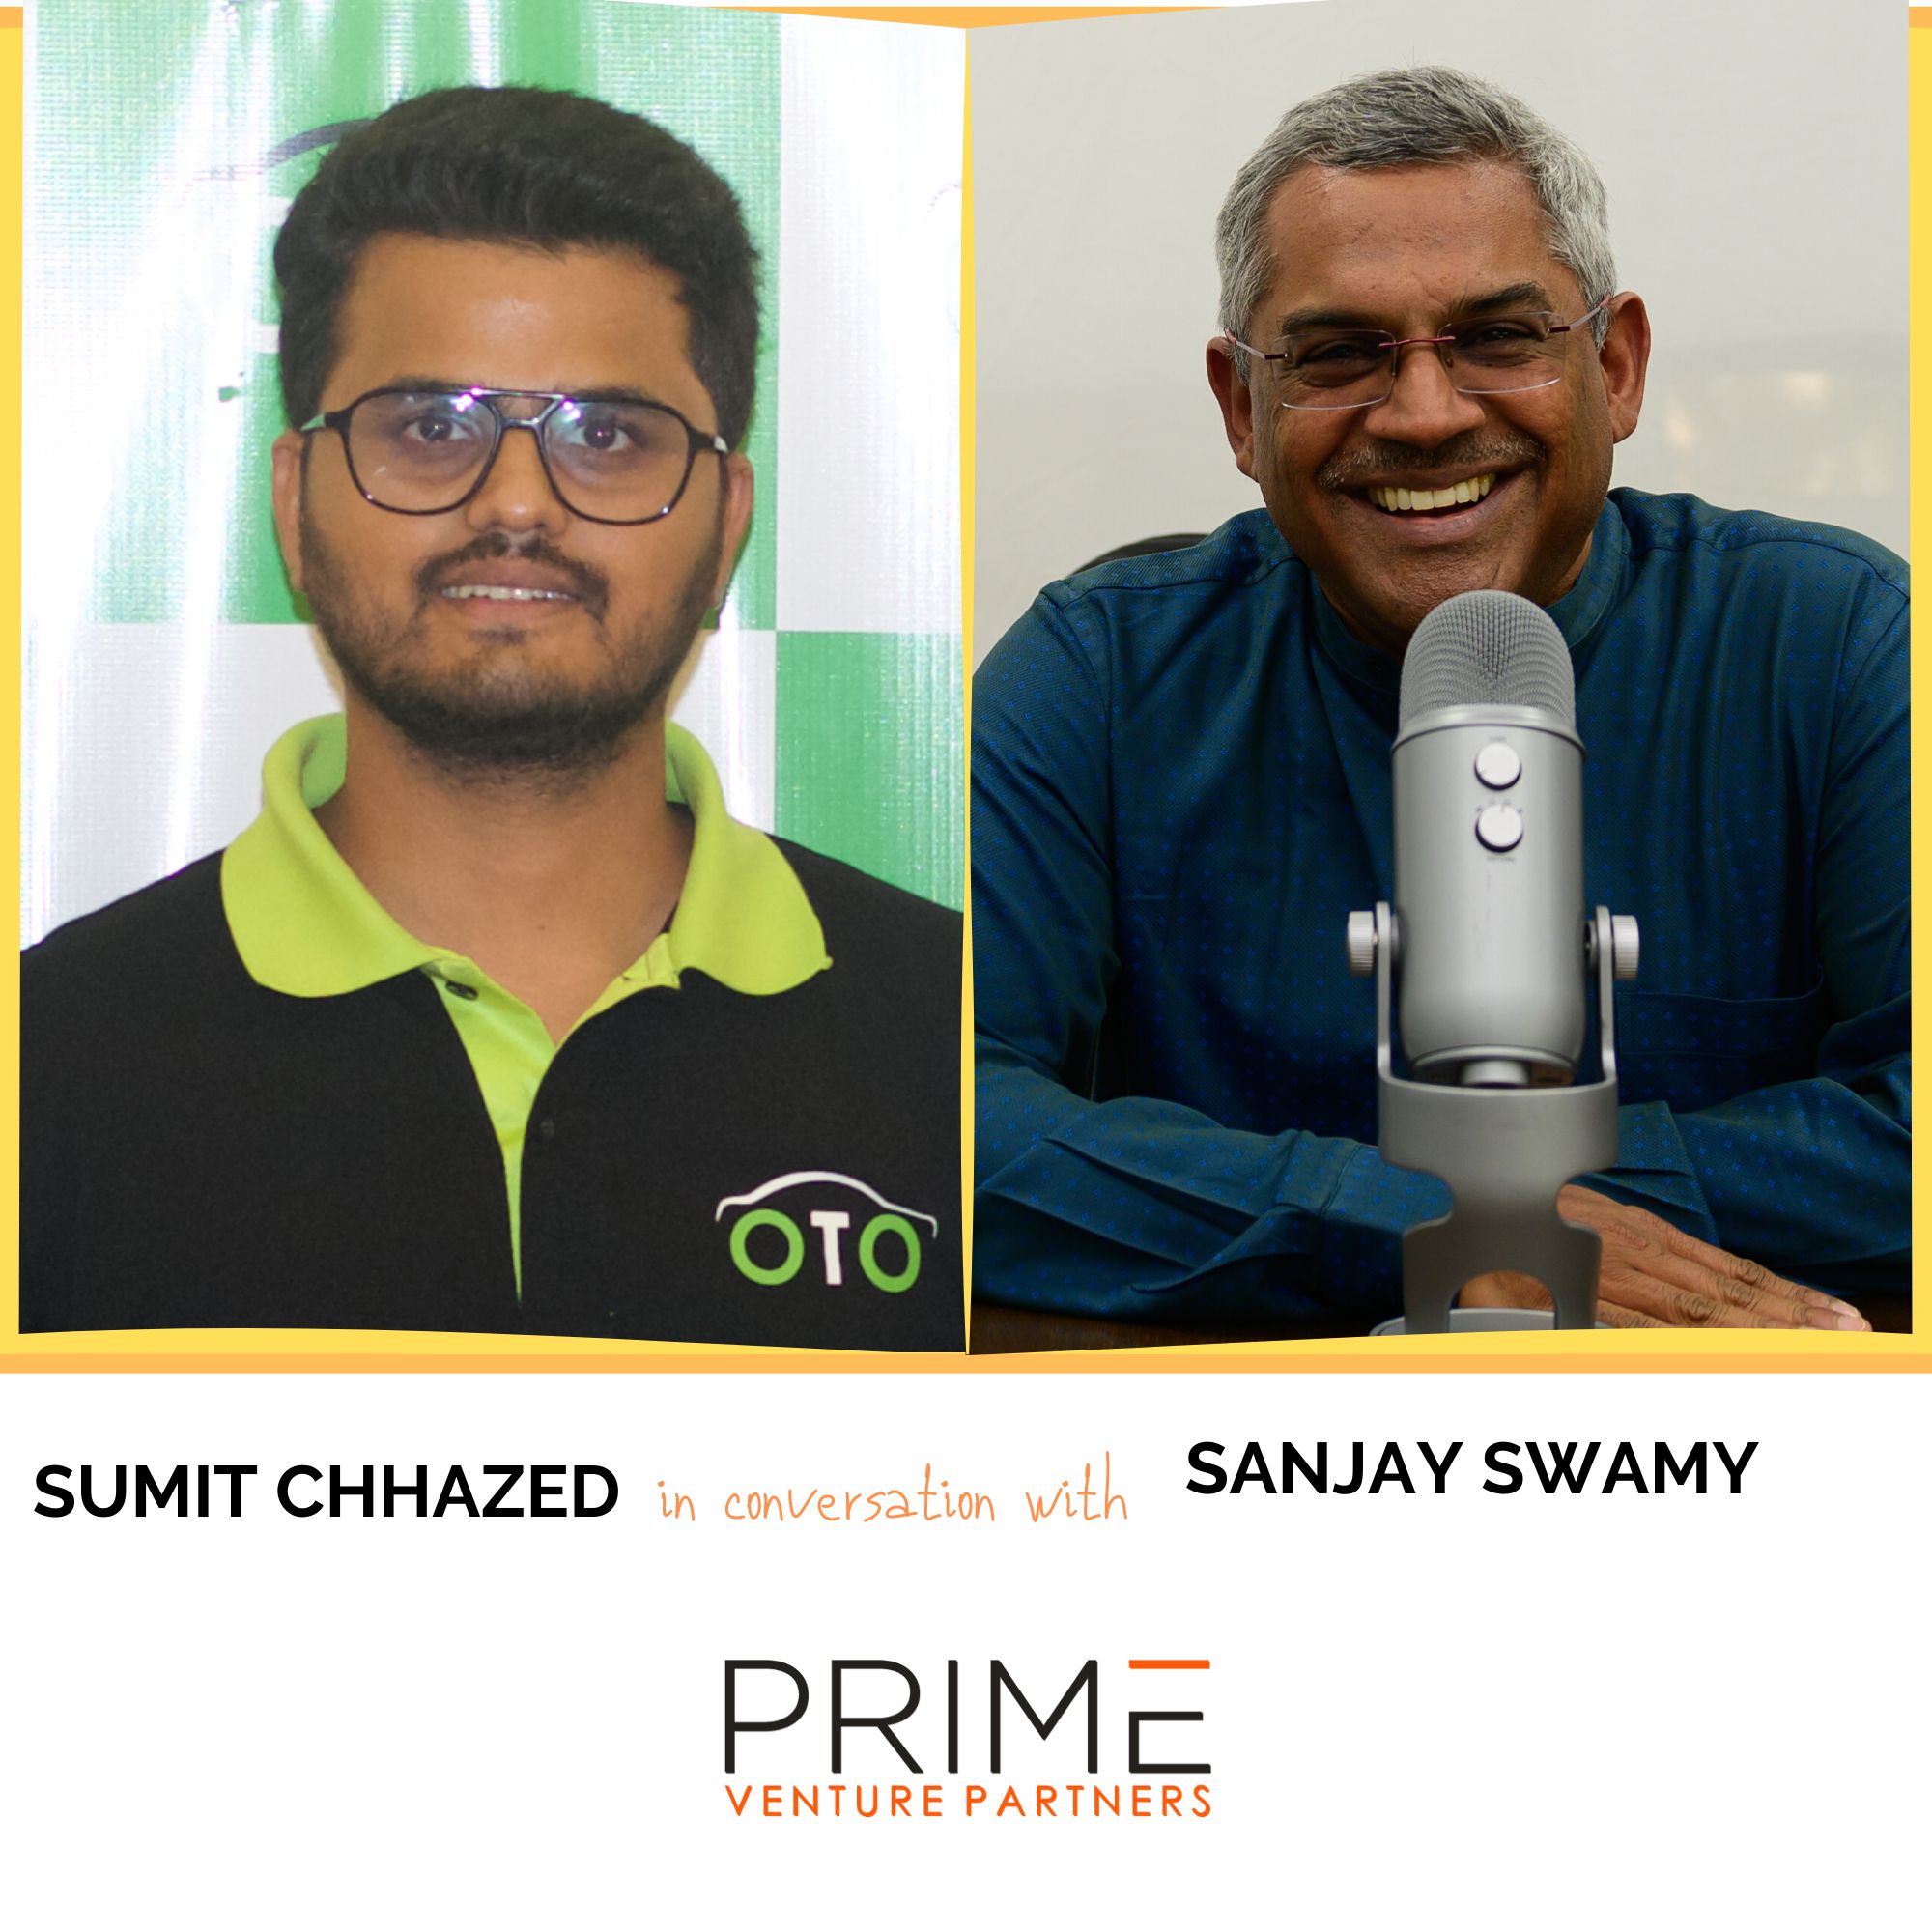 A graphic with guest(Sumit Chhazed) and host's (Sanjay Swamy) name and image.